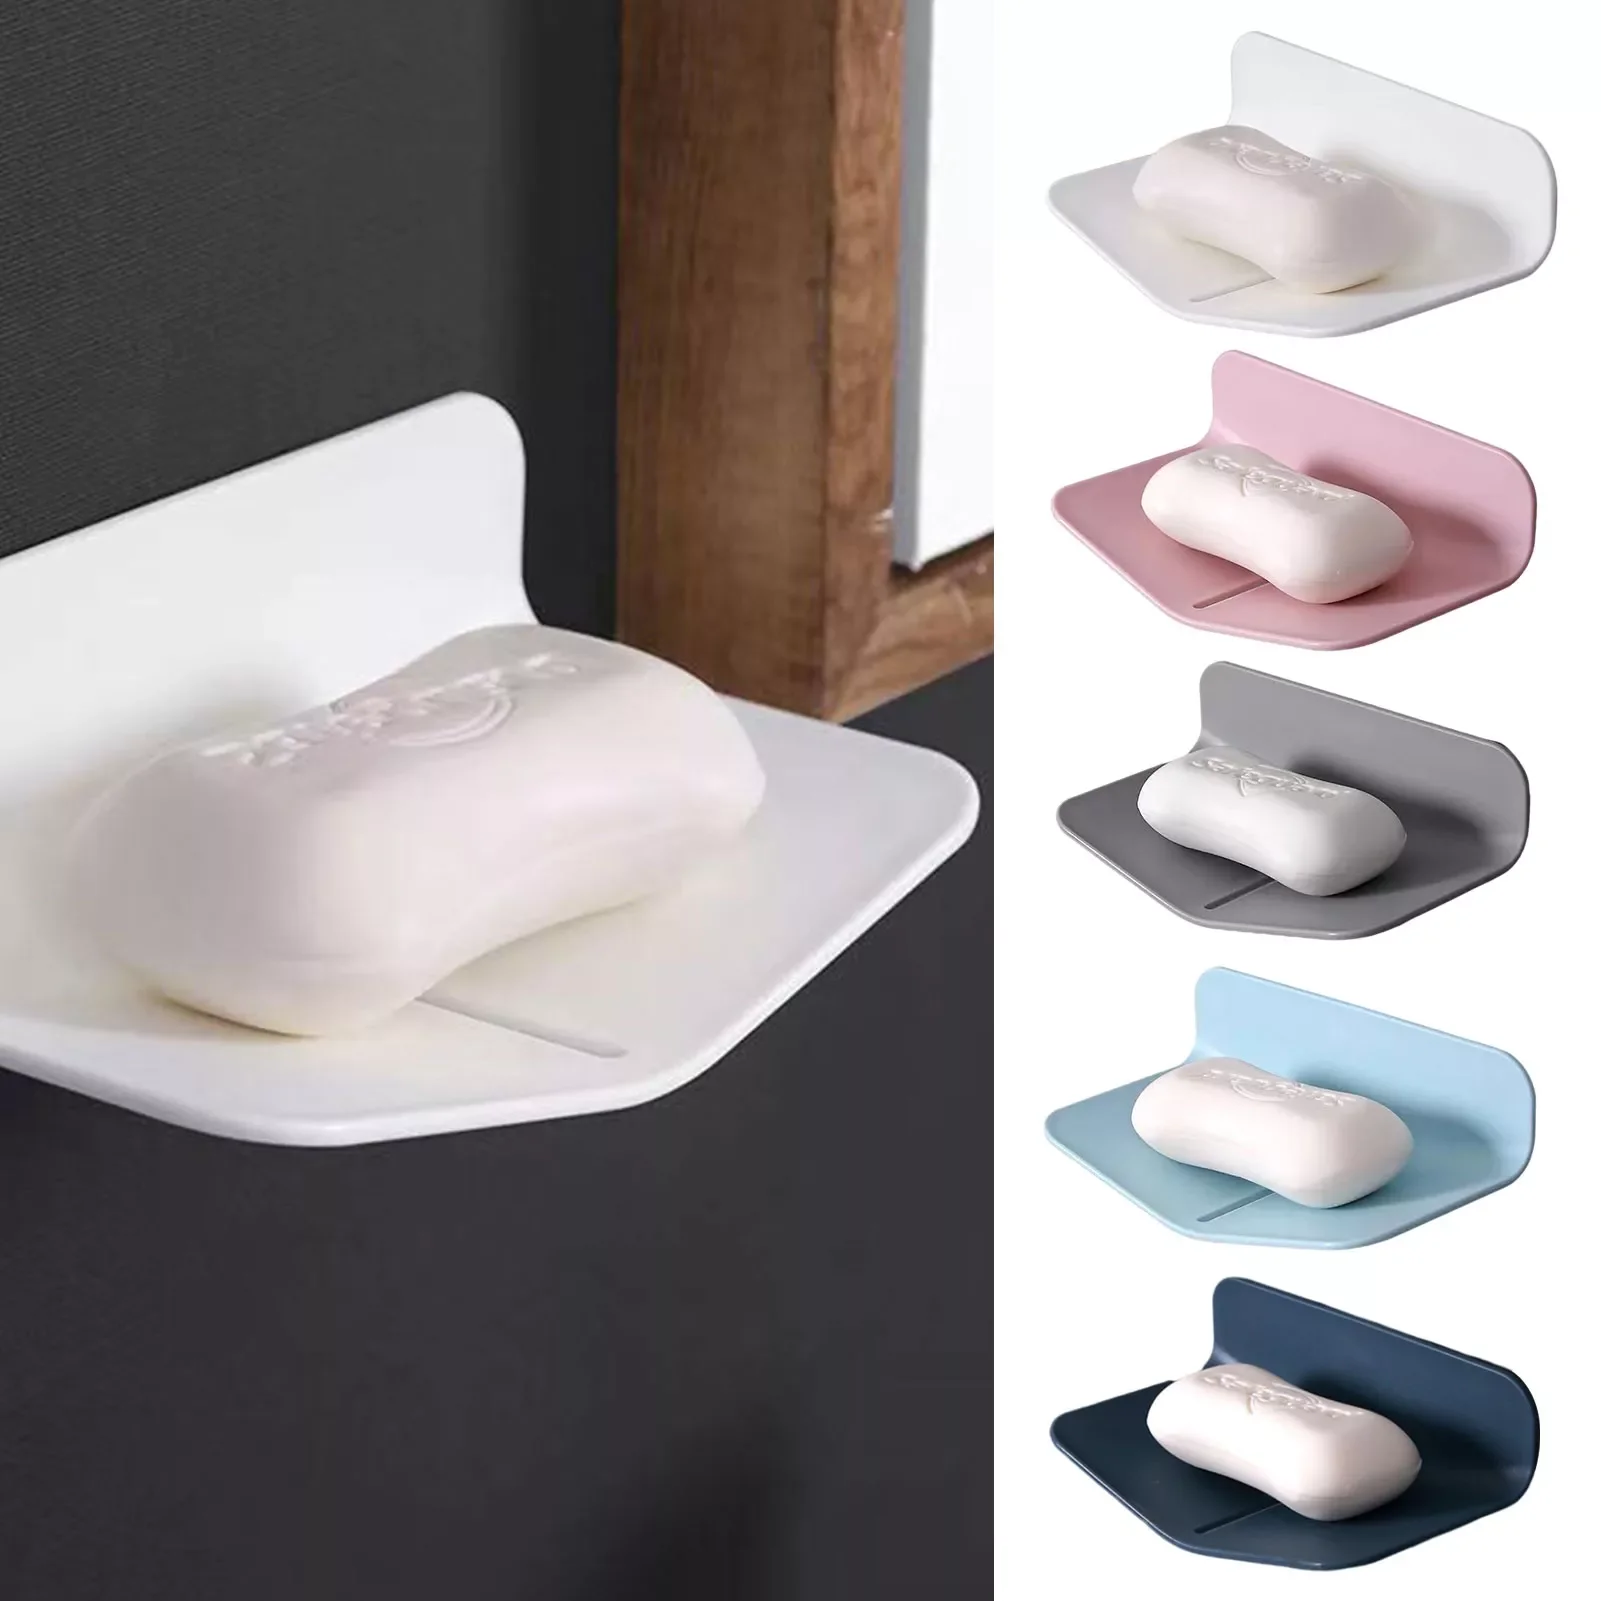 

Soap Dishes Bathroom Soap Holder Wall Mounted No-Drilling V-Shape Self Draining Soap Box For Shower Bathroom Supplies